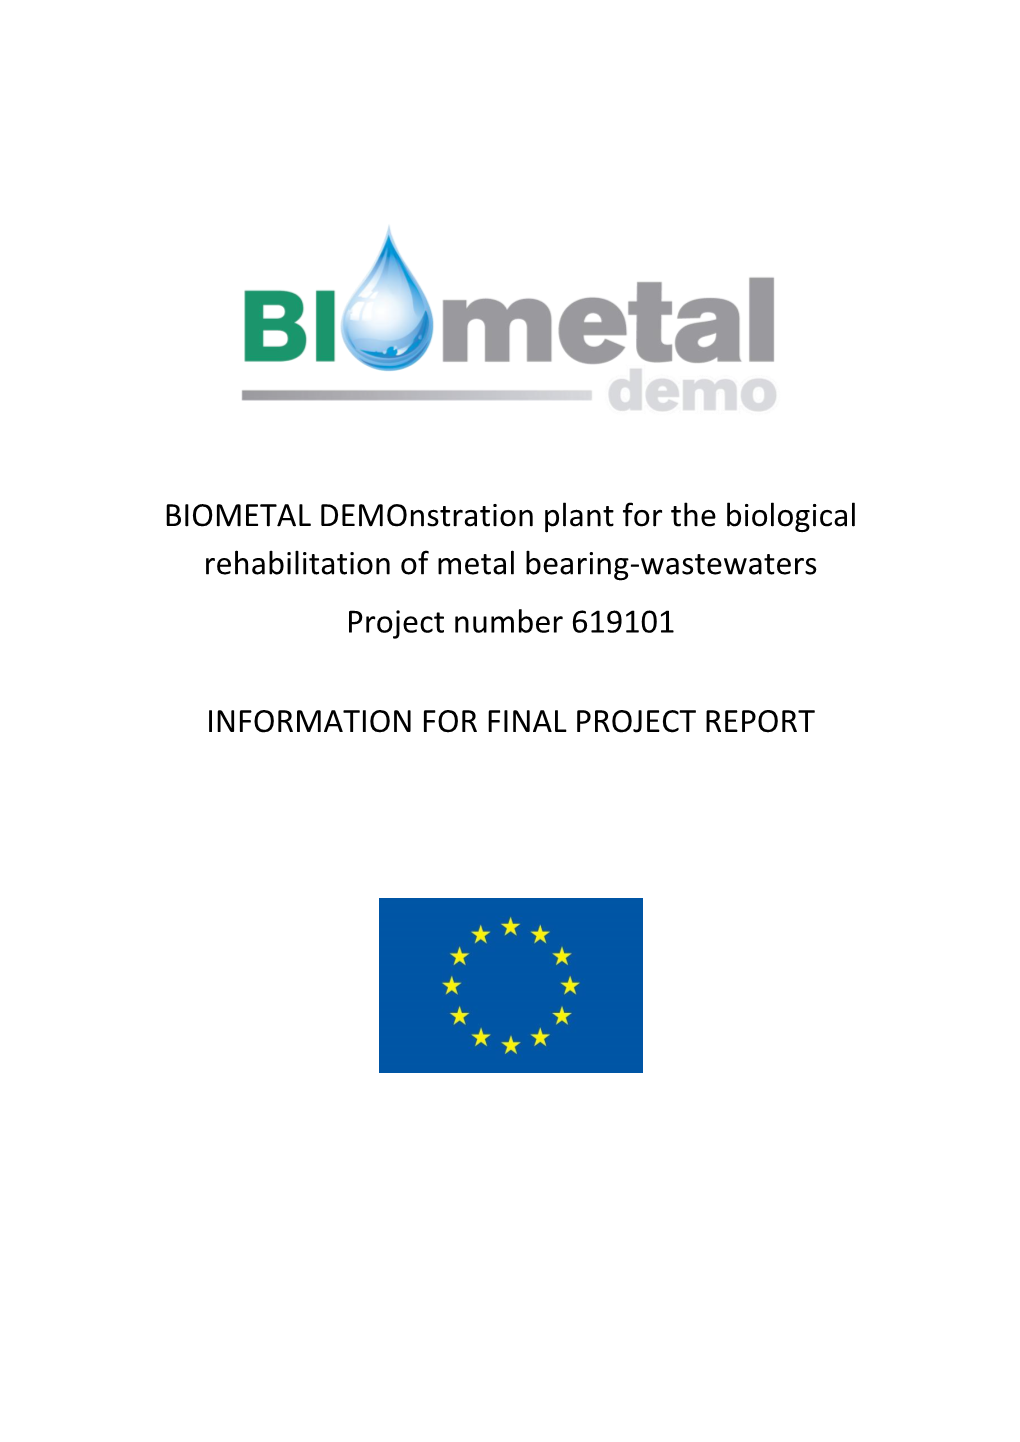 BIOMETAL Demonstration Plant for the Biological Rehabilitation of Metal Bearing-Wastewaters Project Number 619101